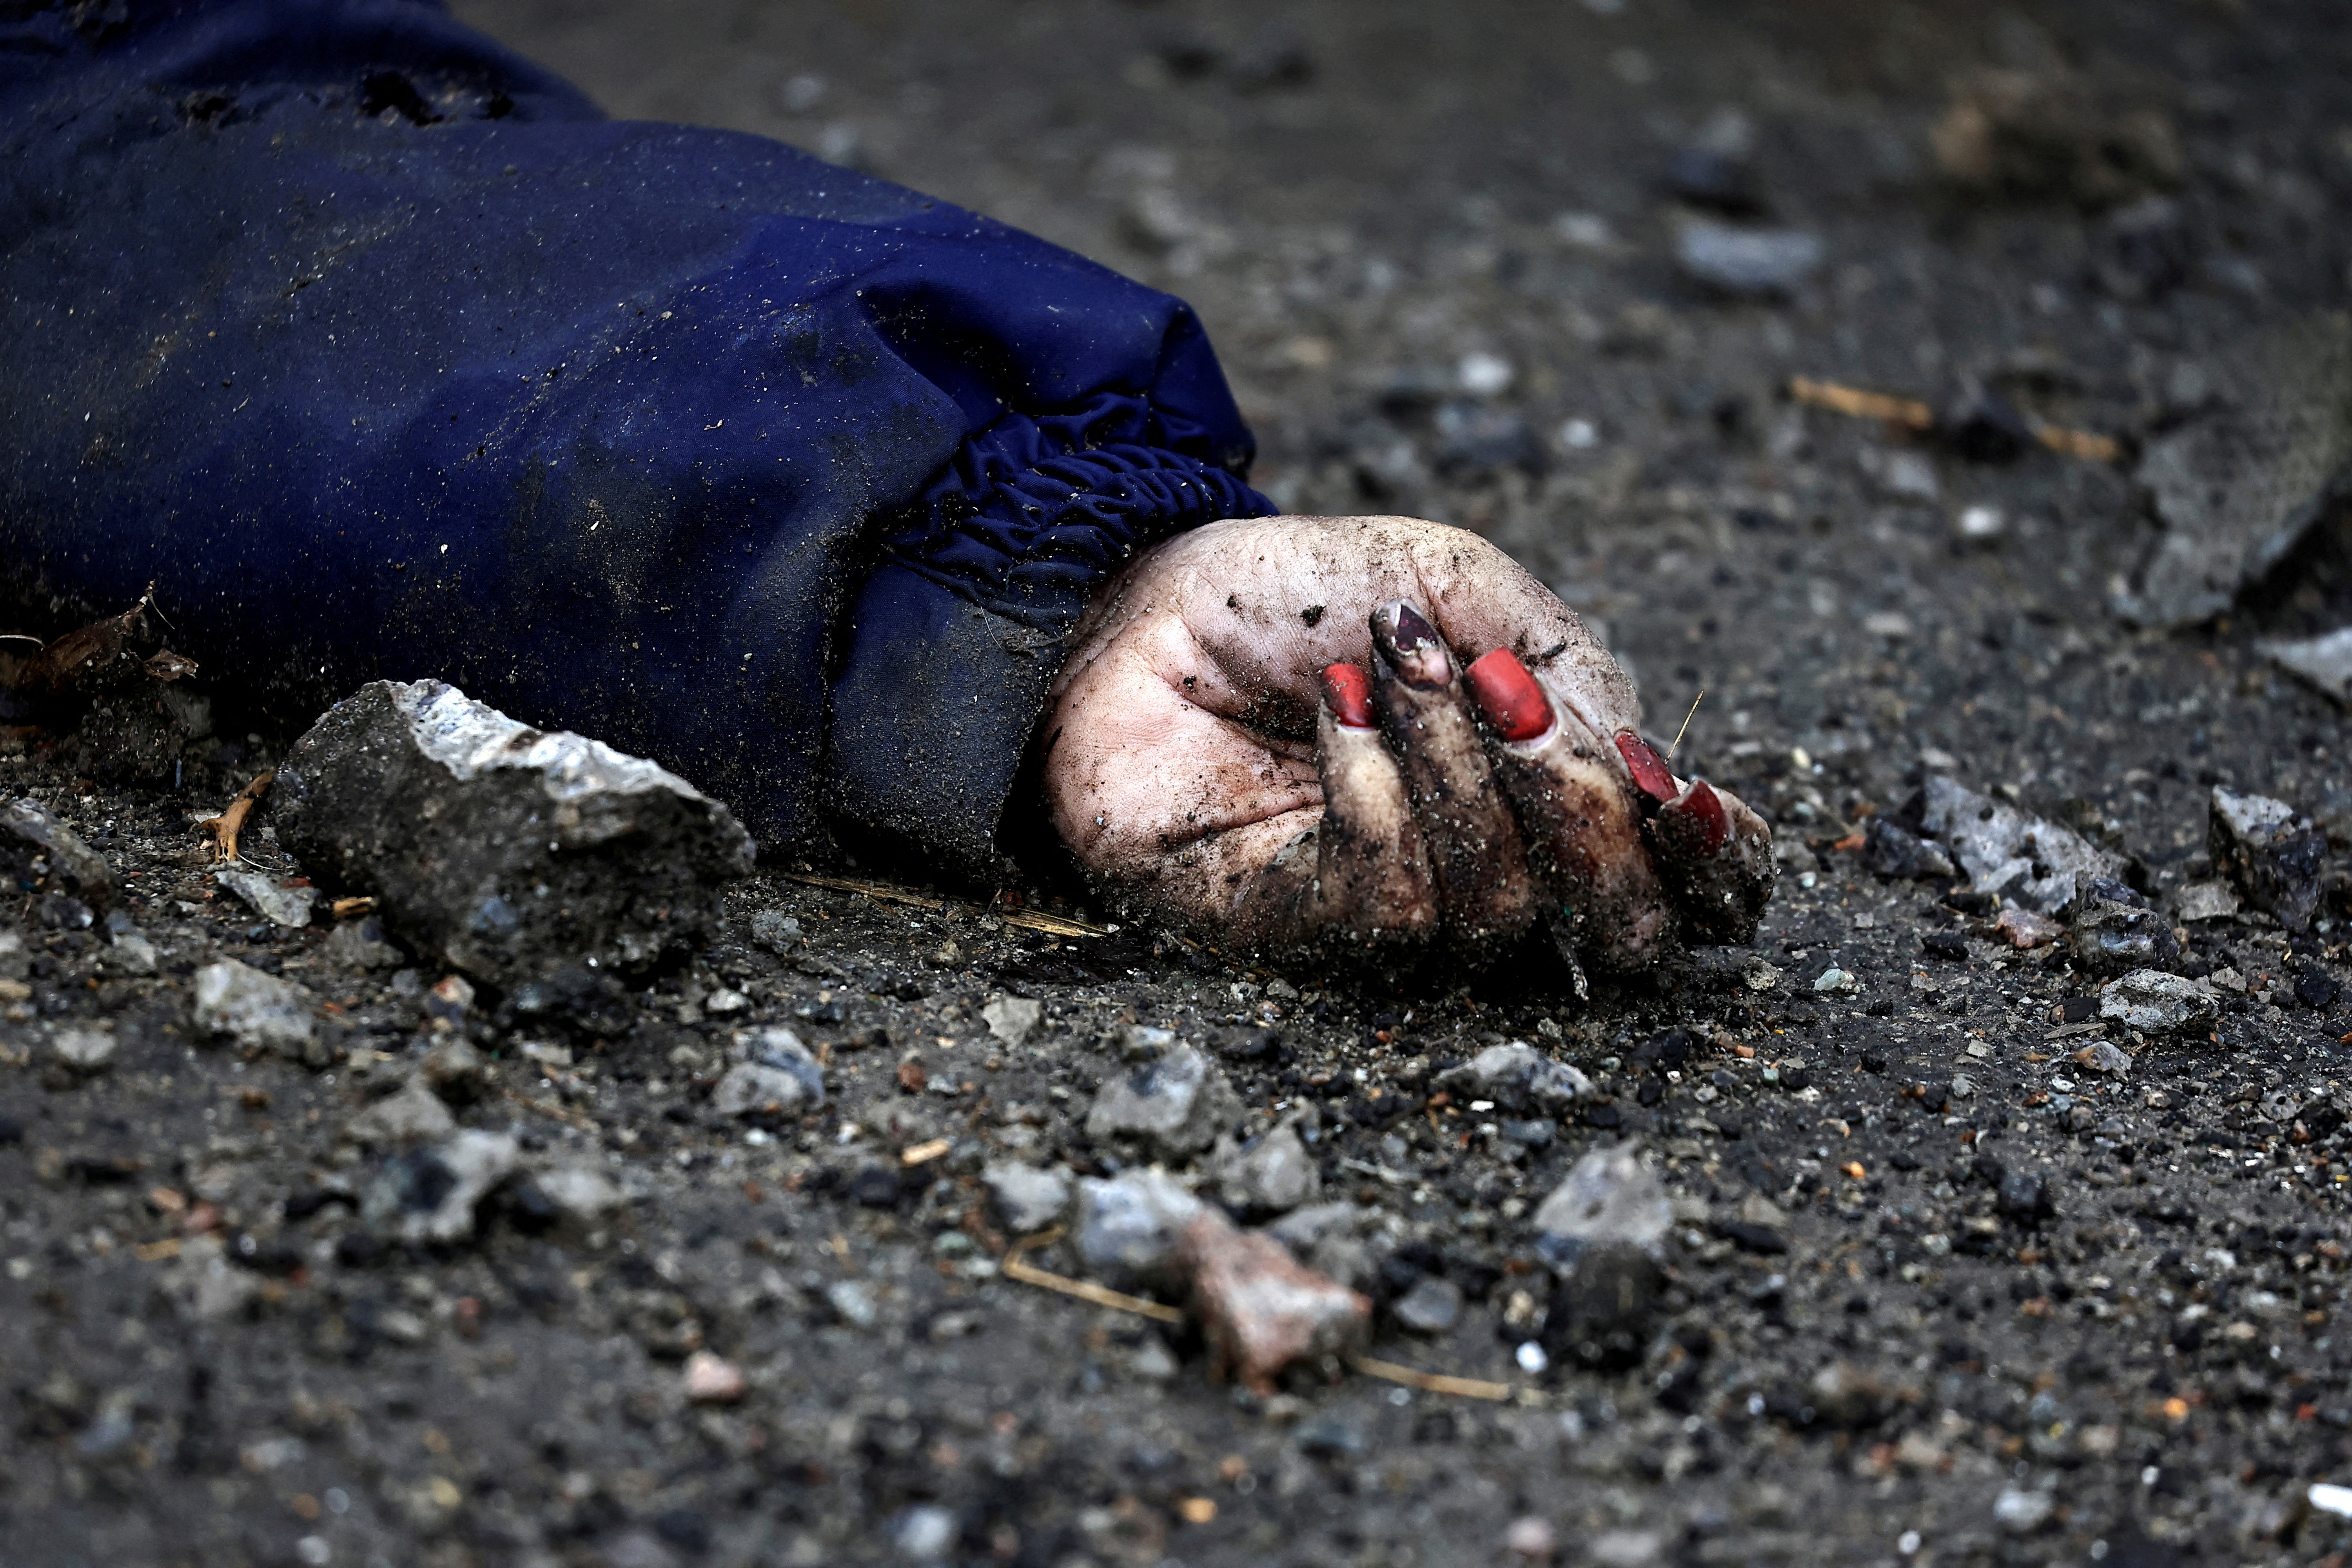 Bucha's images, like this one showing the hand of Iryna Filkina, killed by Putin's troops, traveled the world (REUTERS/Zohra Bensemra/File)